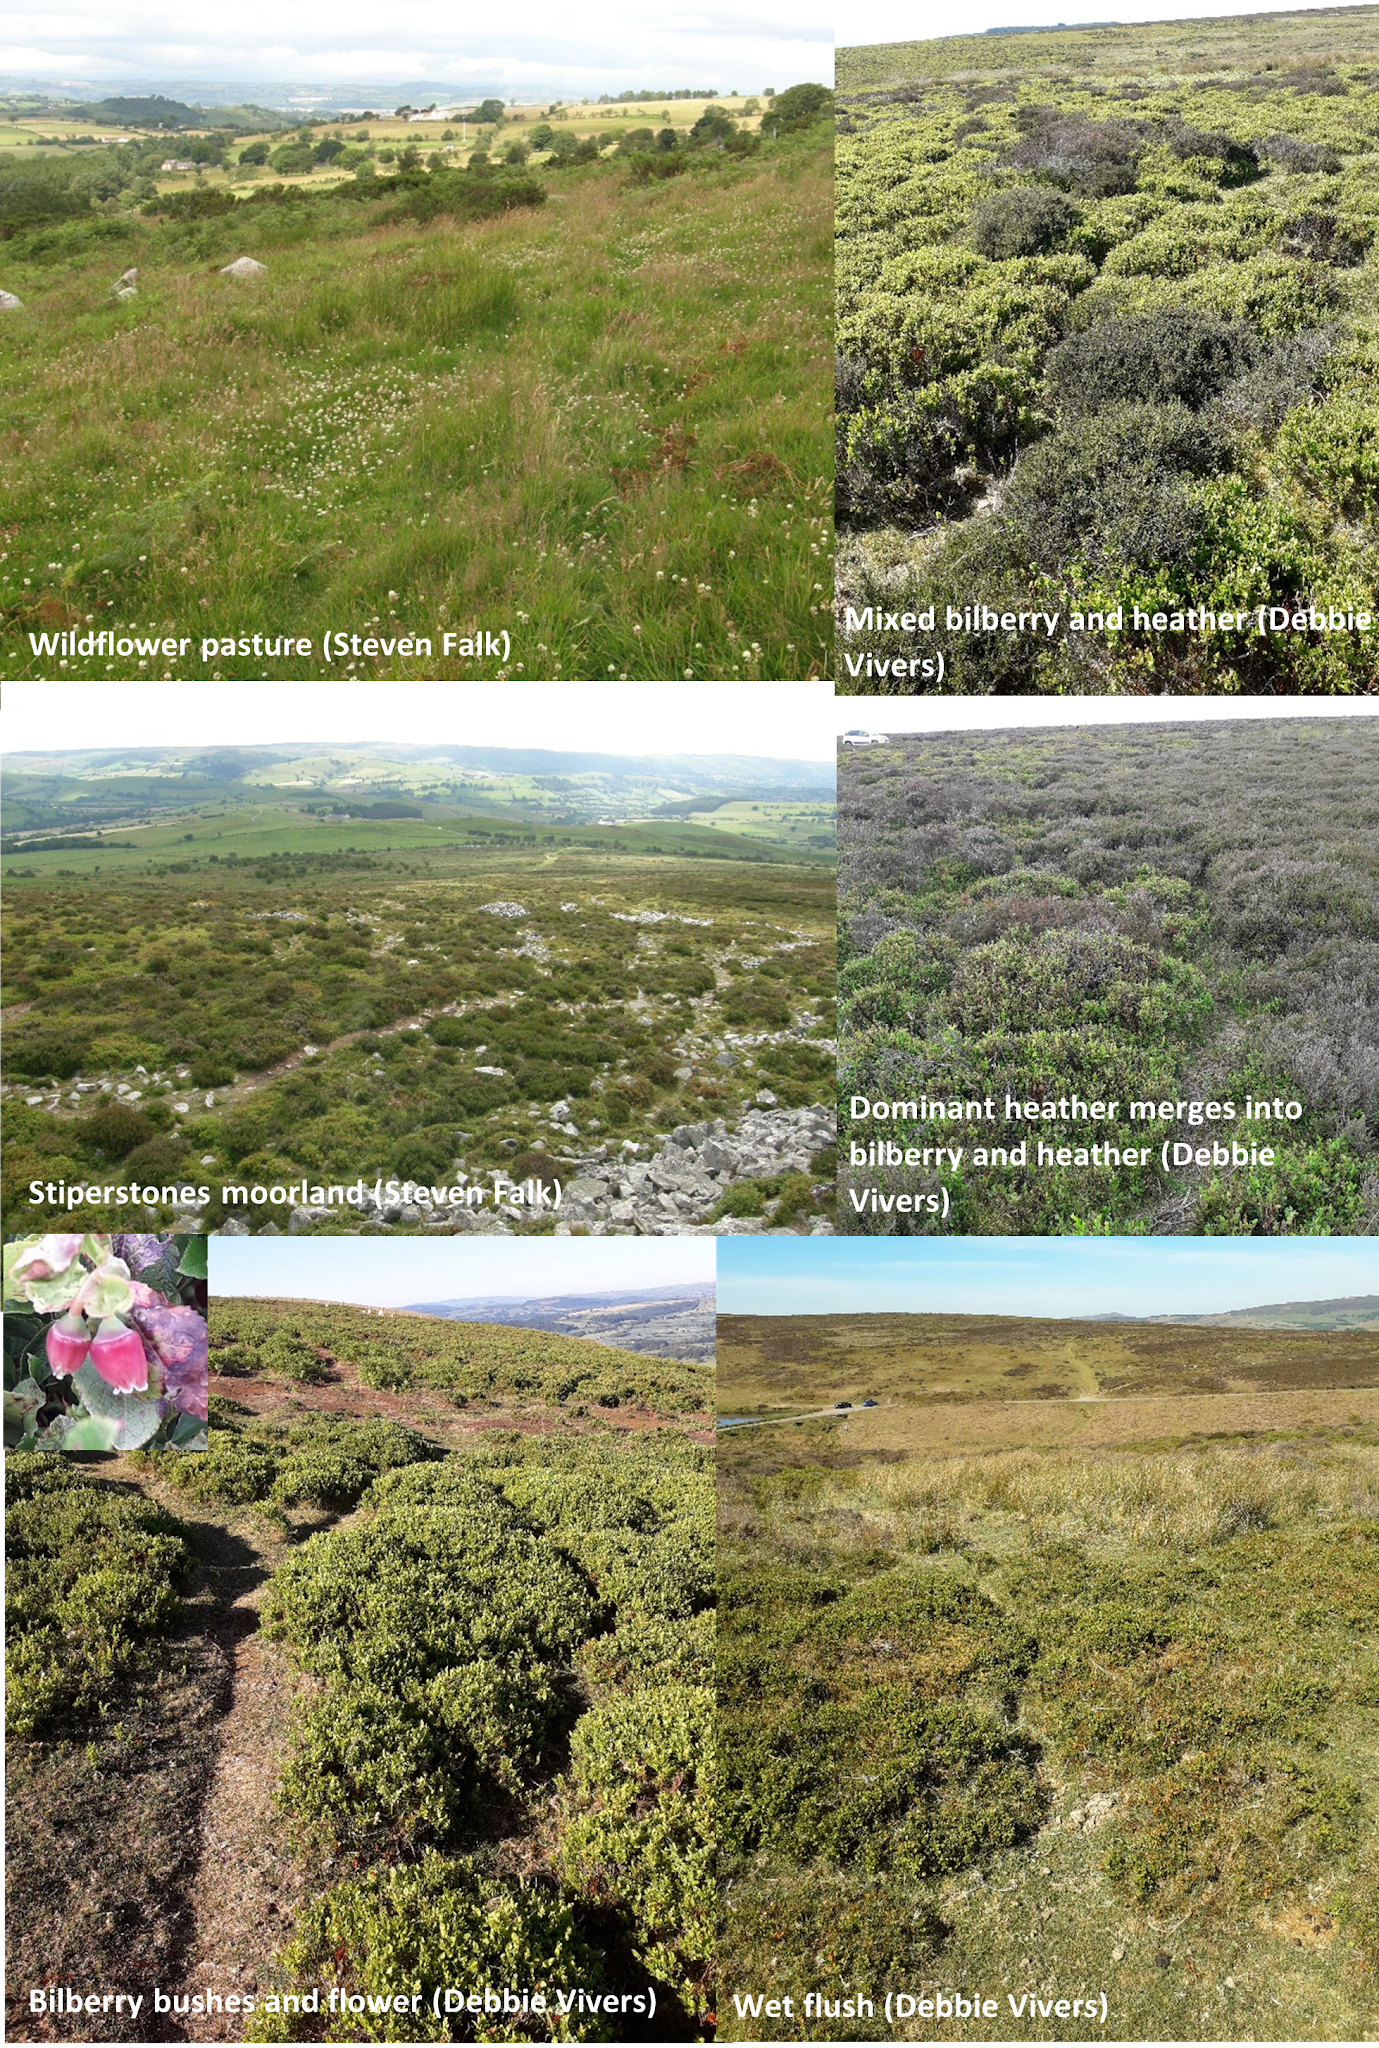 Bilberry bumblebee habitat examples in the UK: wildflower pasture, mixed bilberry and heather, Stiperstones moorland, dominant heather merging into bilberry and heather mosaic, bilberry bushes and bilberry flower, wet flush